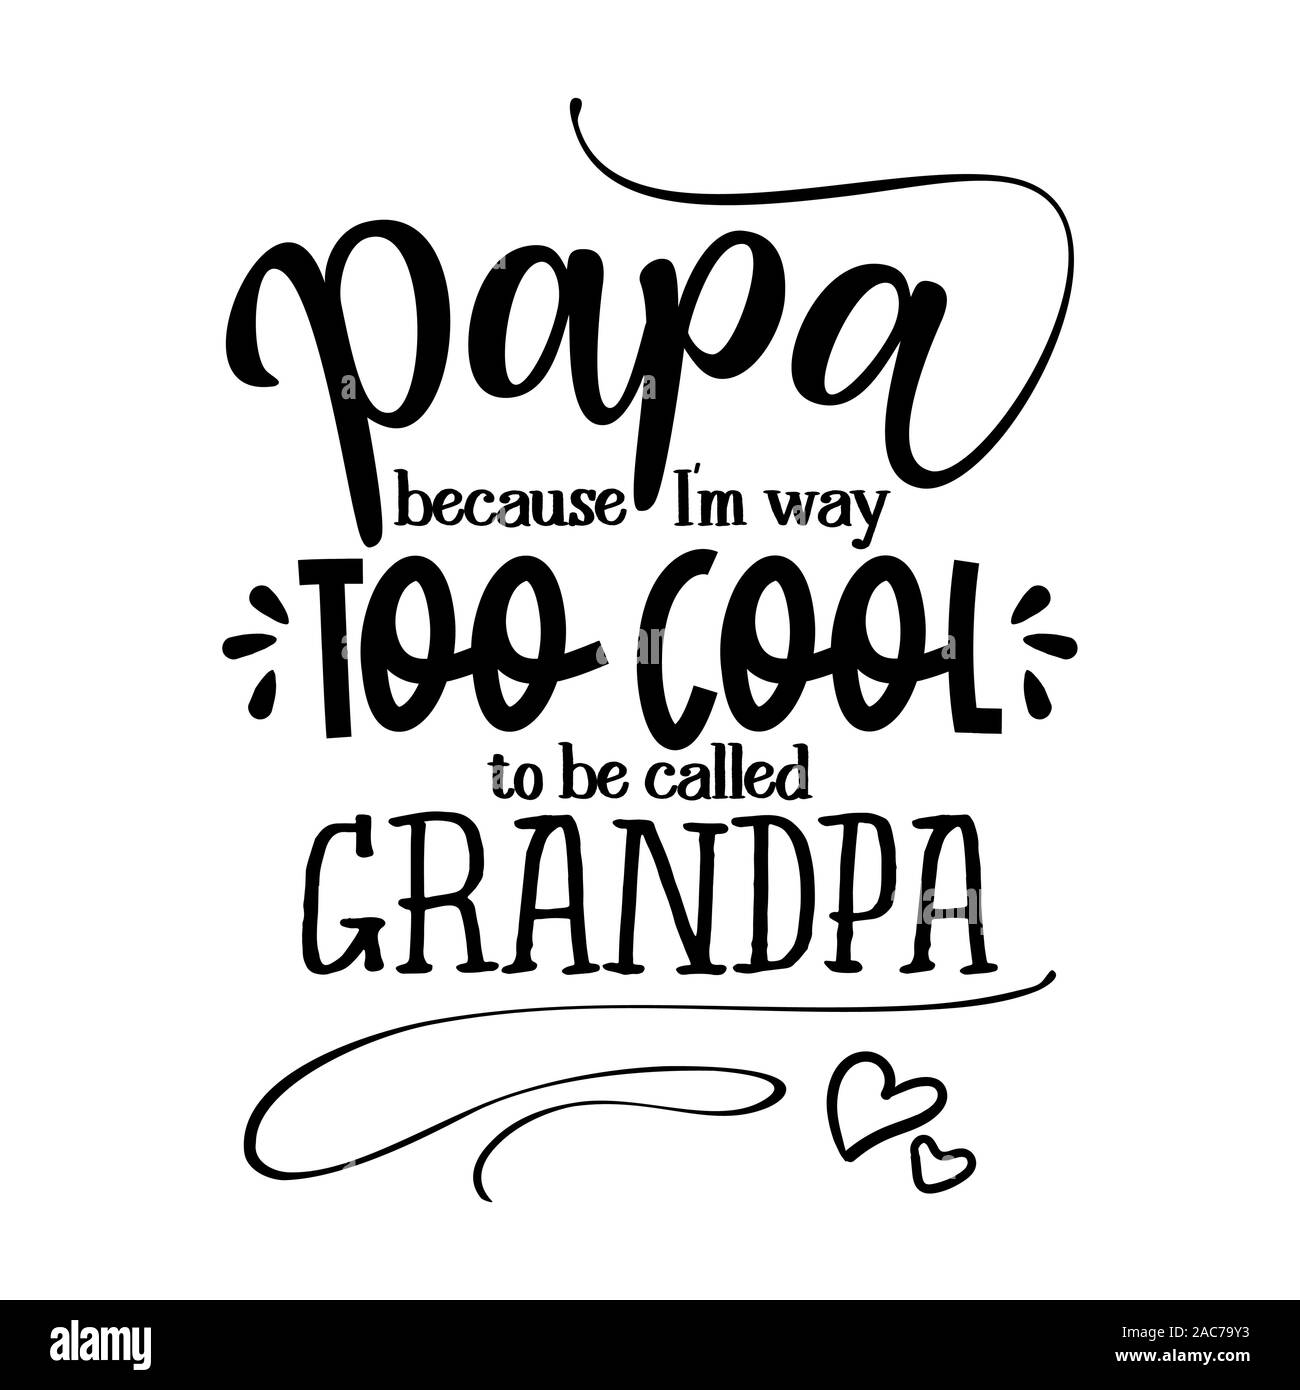 Papa because I am way too cool to be called grandpa - funny vector quotes. Good for Father's day gift or scrap booking, posters, textiles, gifts. Stock Vector